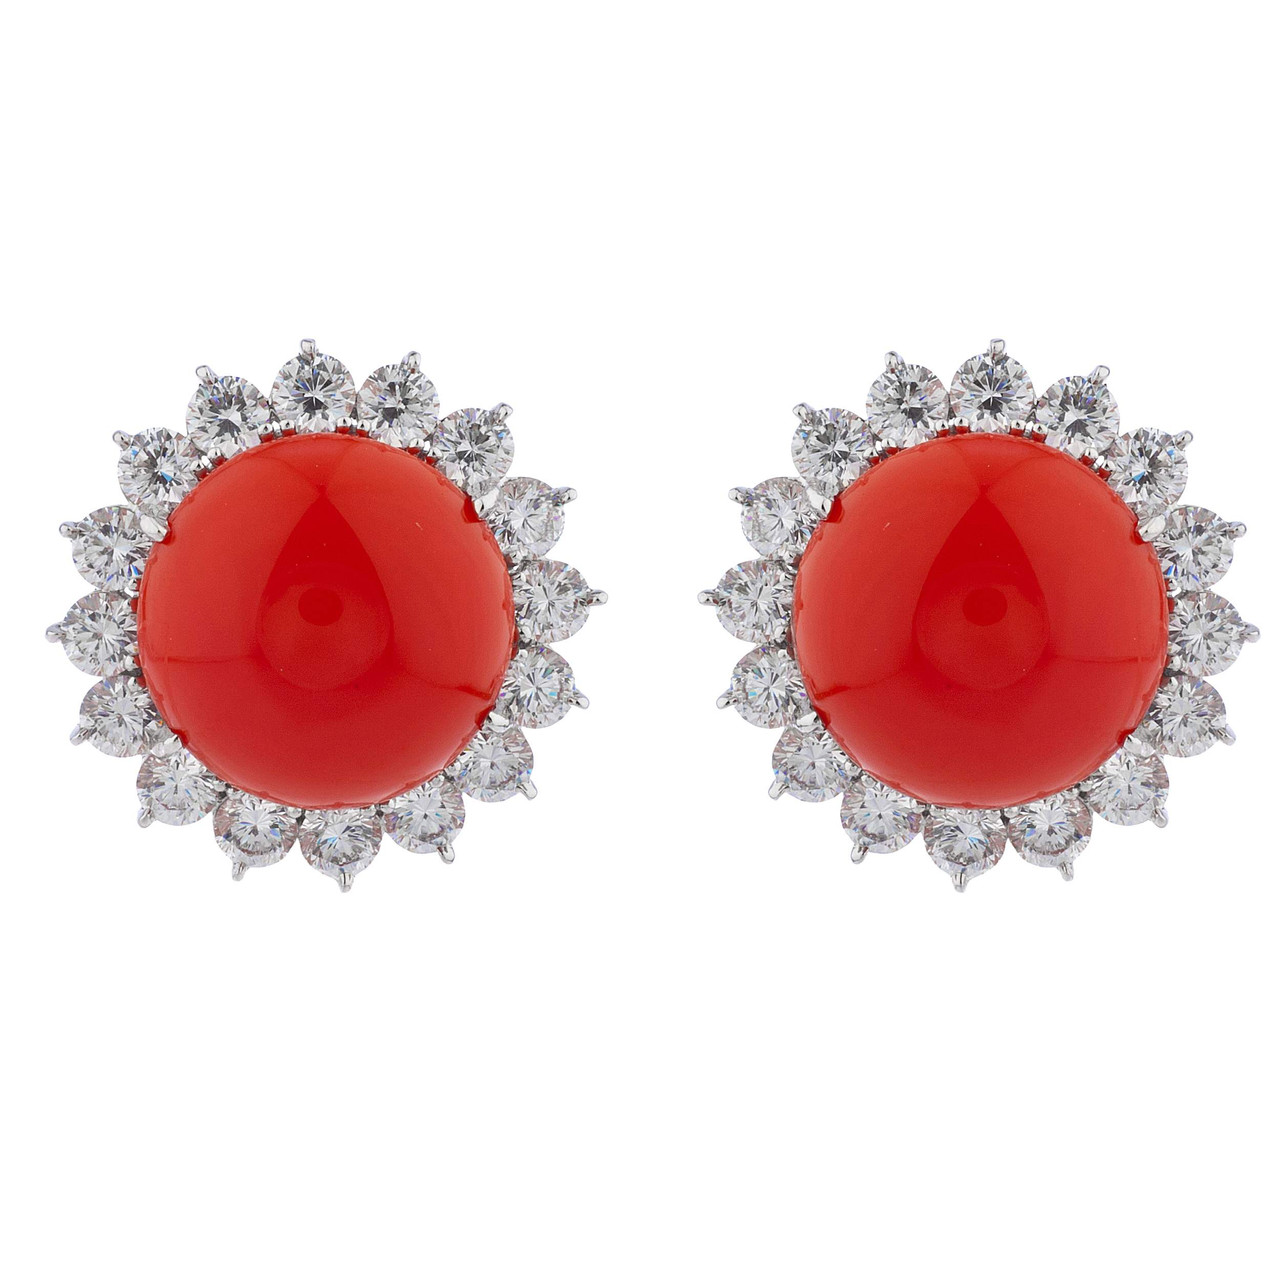 Mediterranean Red Coral Jewelry Prices Soar Due to Chinese Demand